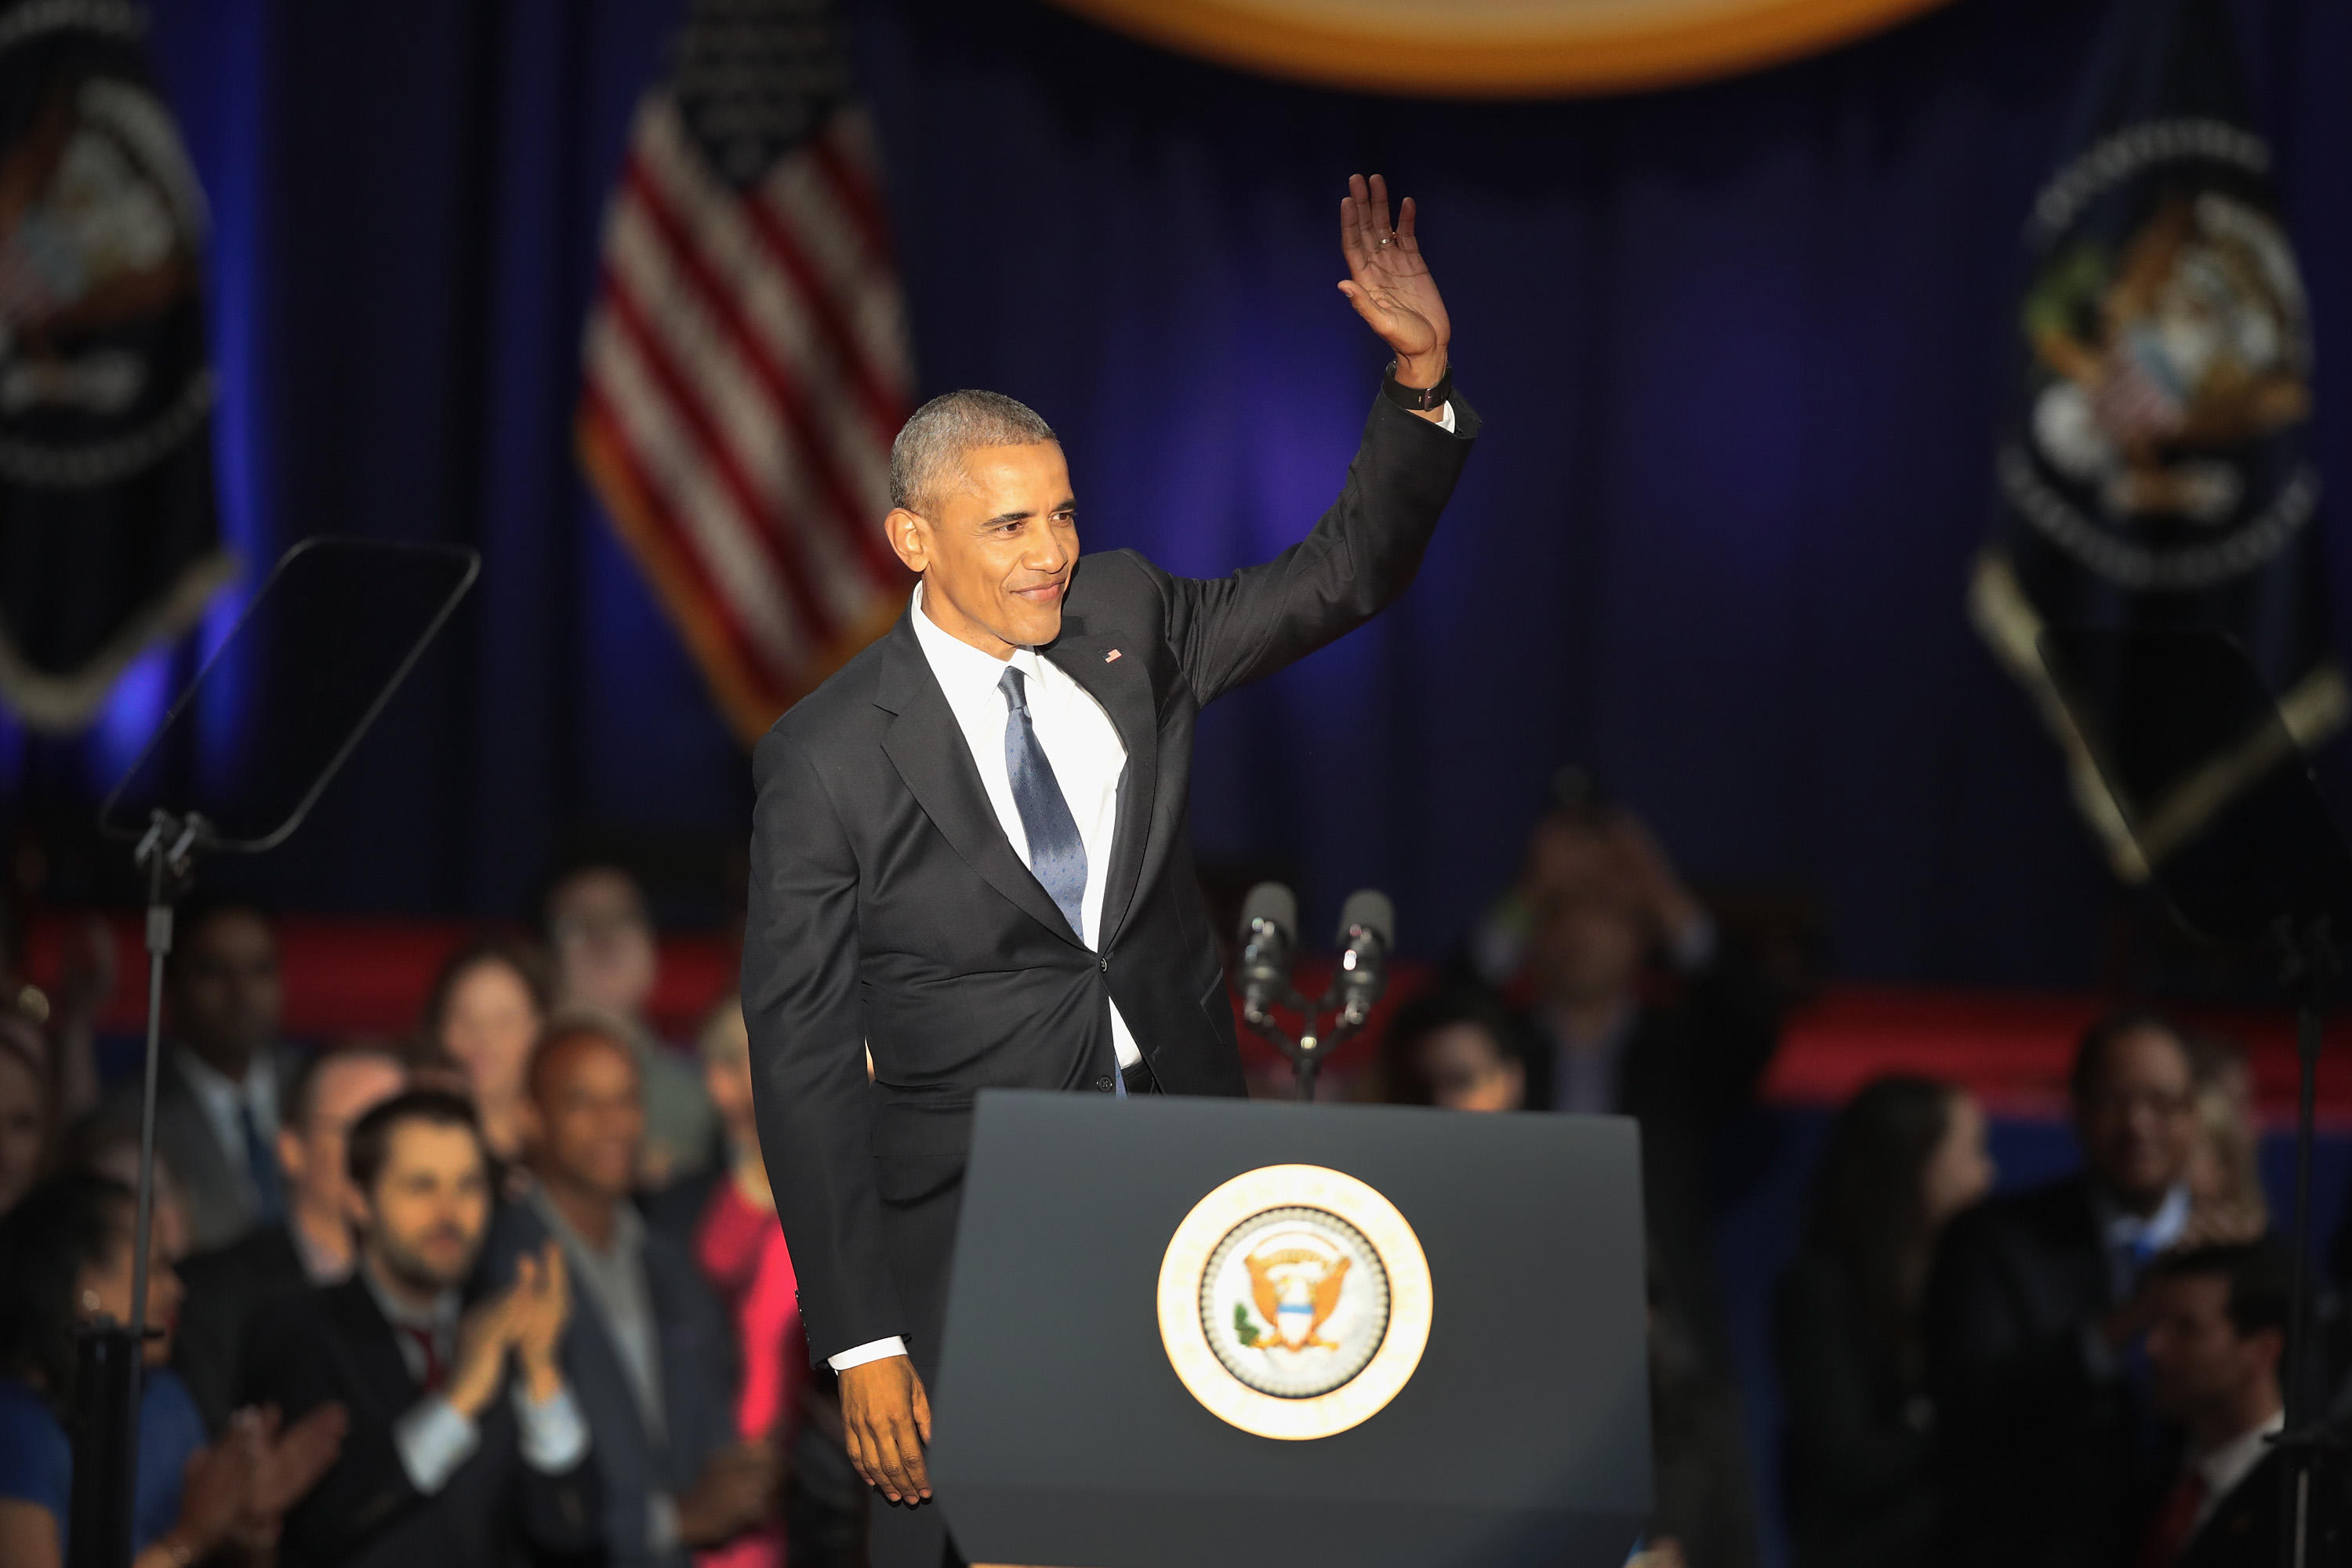 7 moments that stood out during President Obama's farewell speech - CBS News